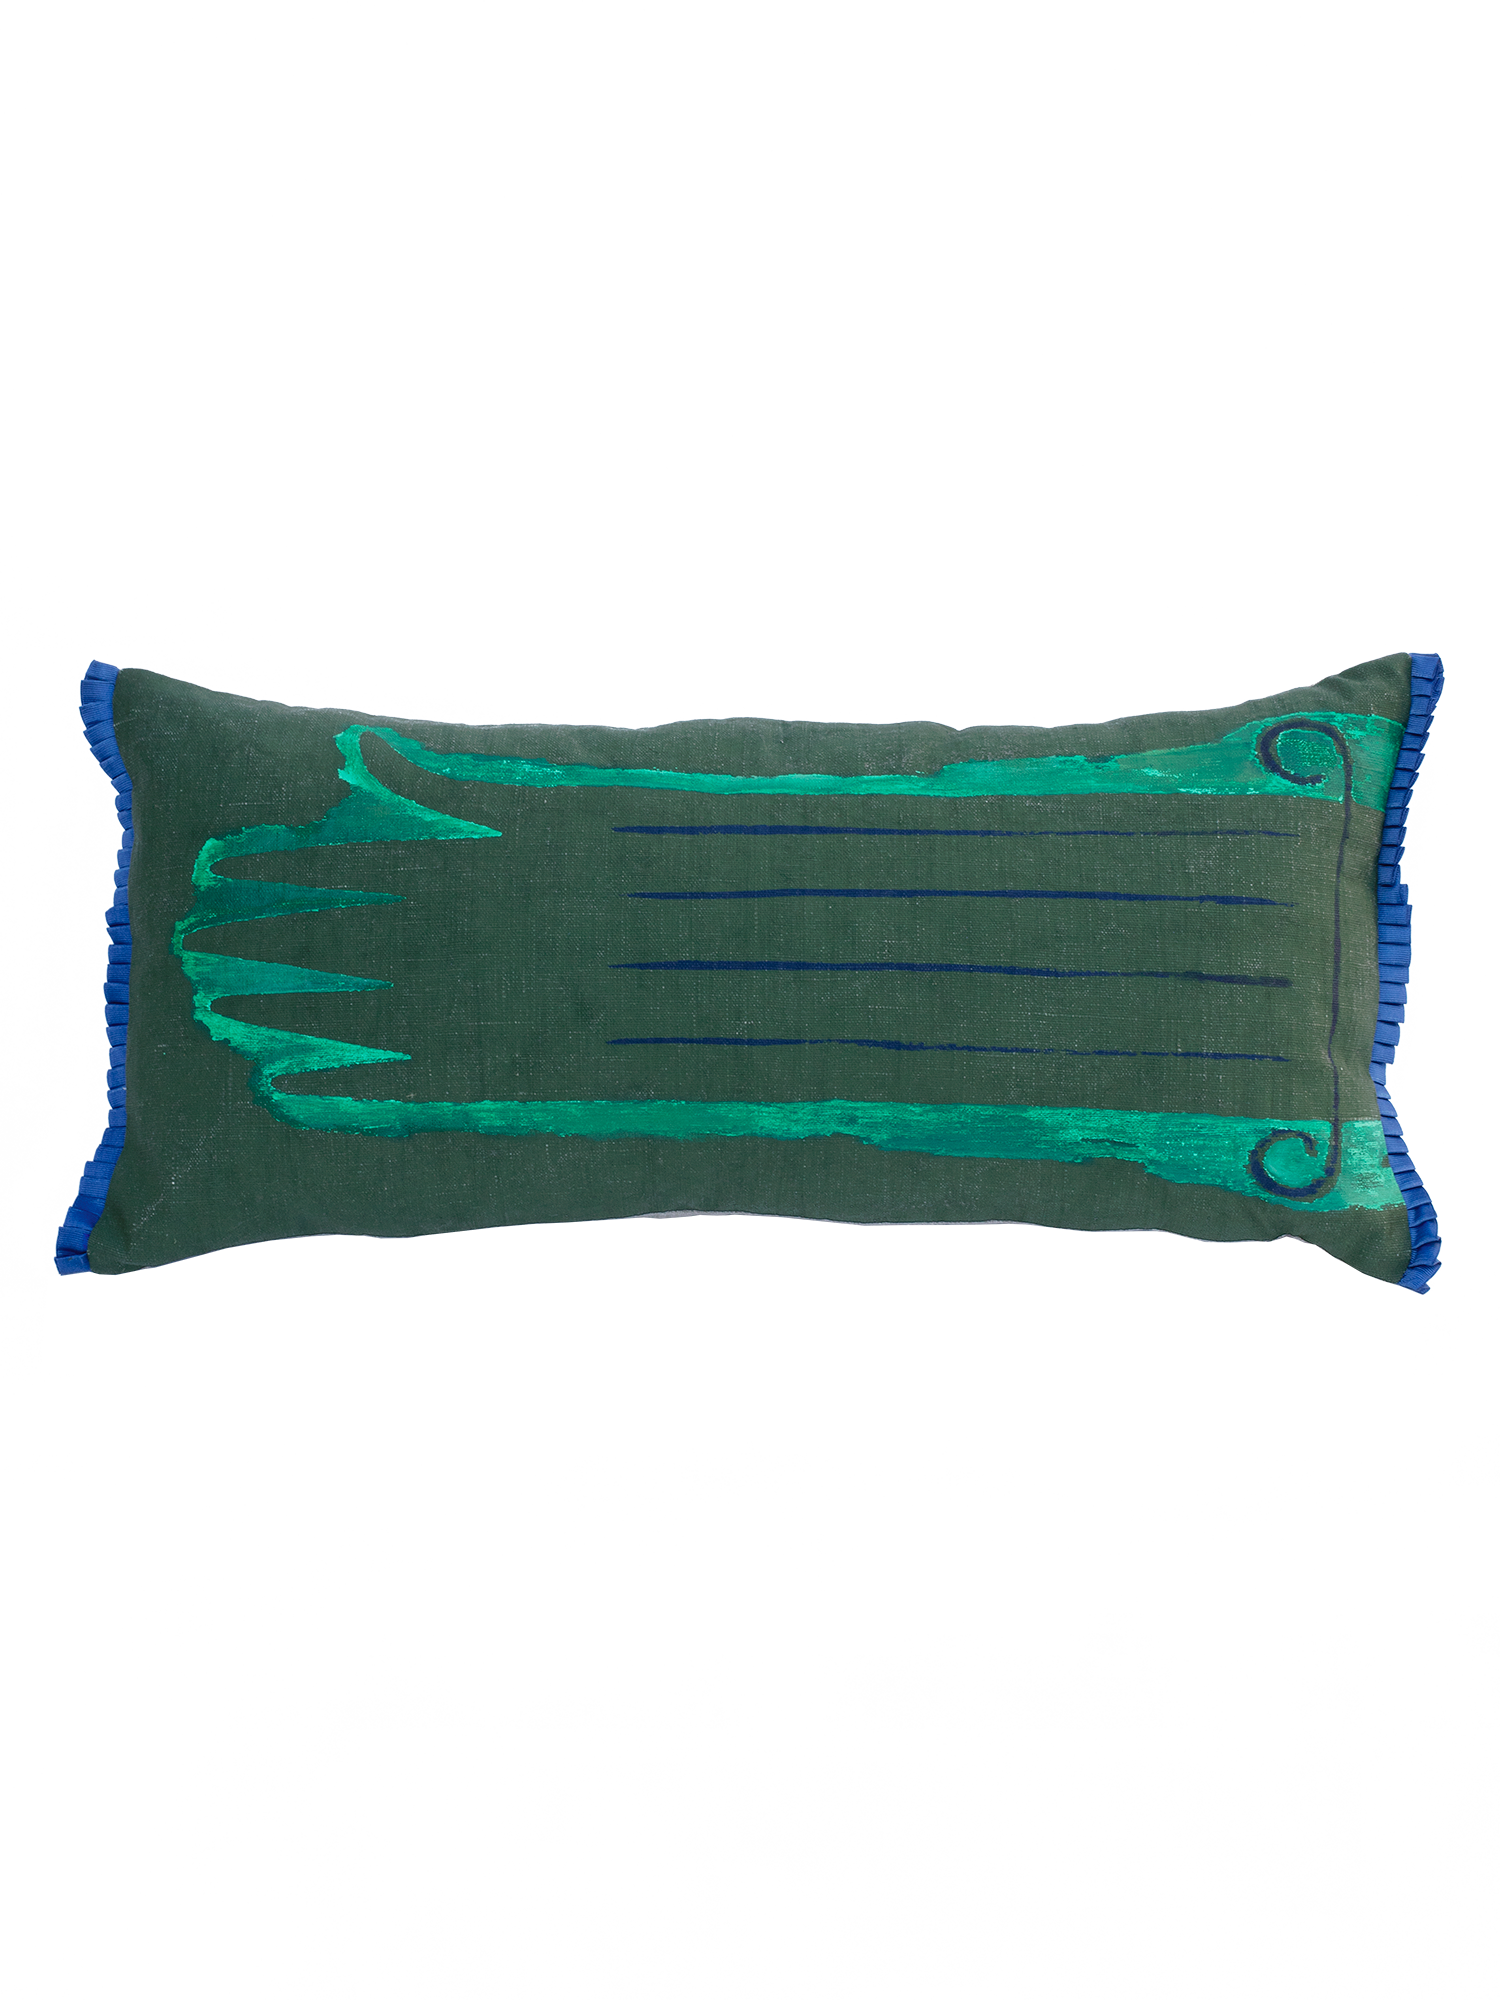 Cushion in green Envy colourway, screenprinted hand shape on linen with duck feather